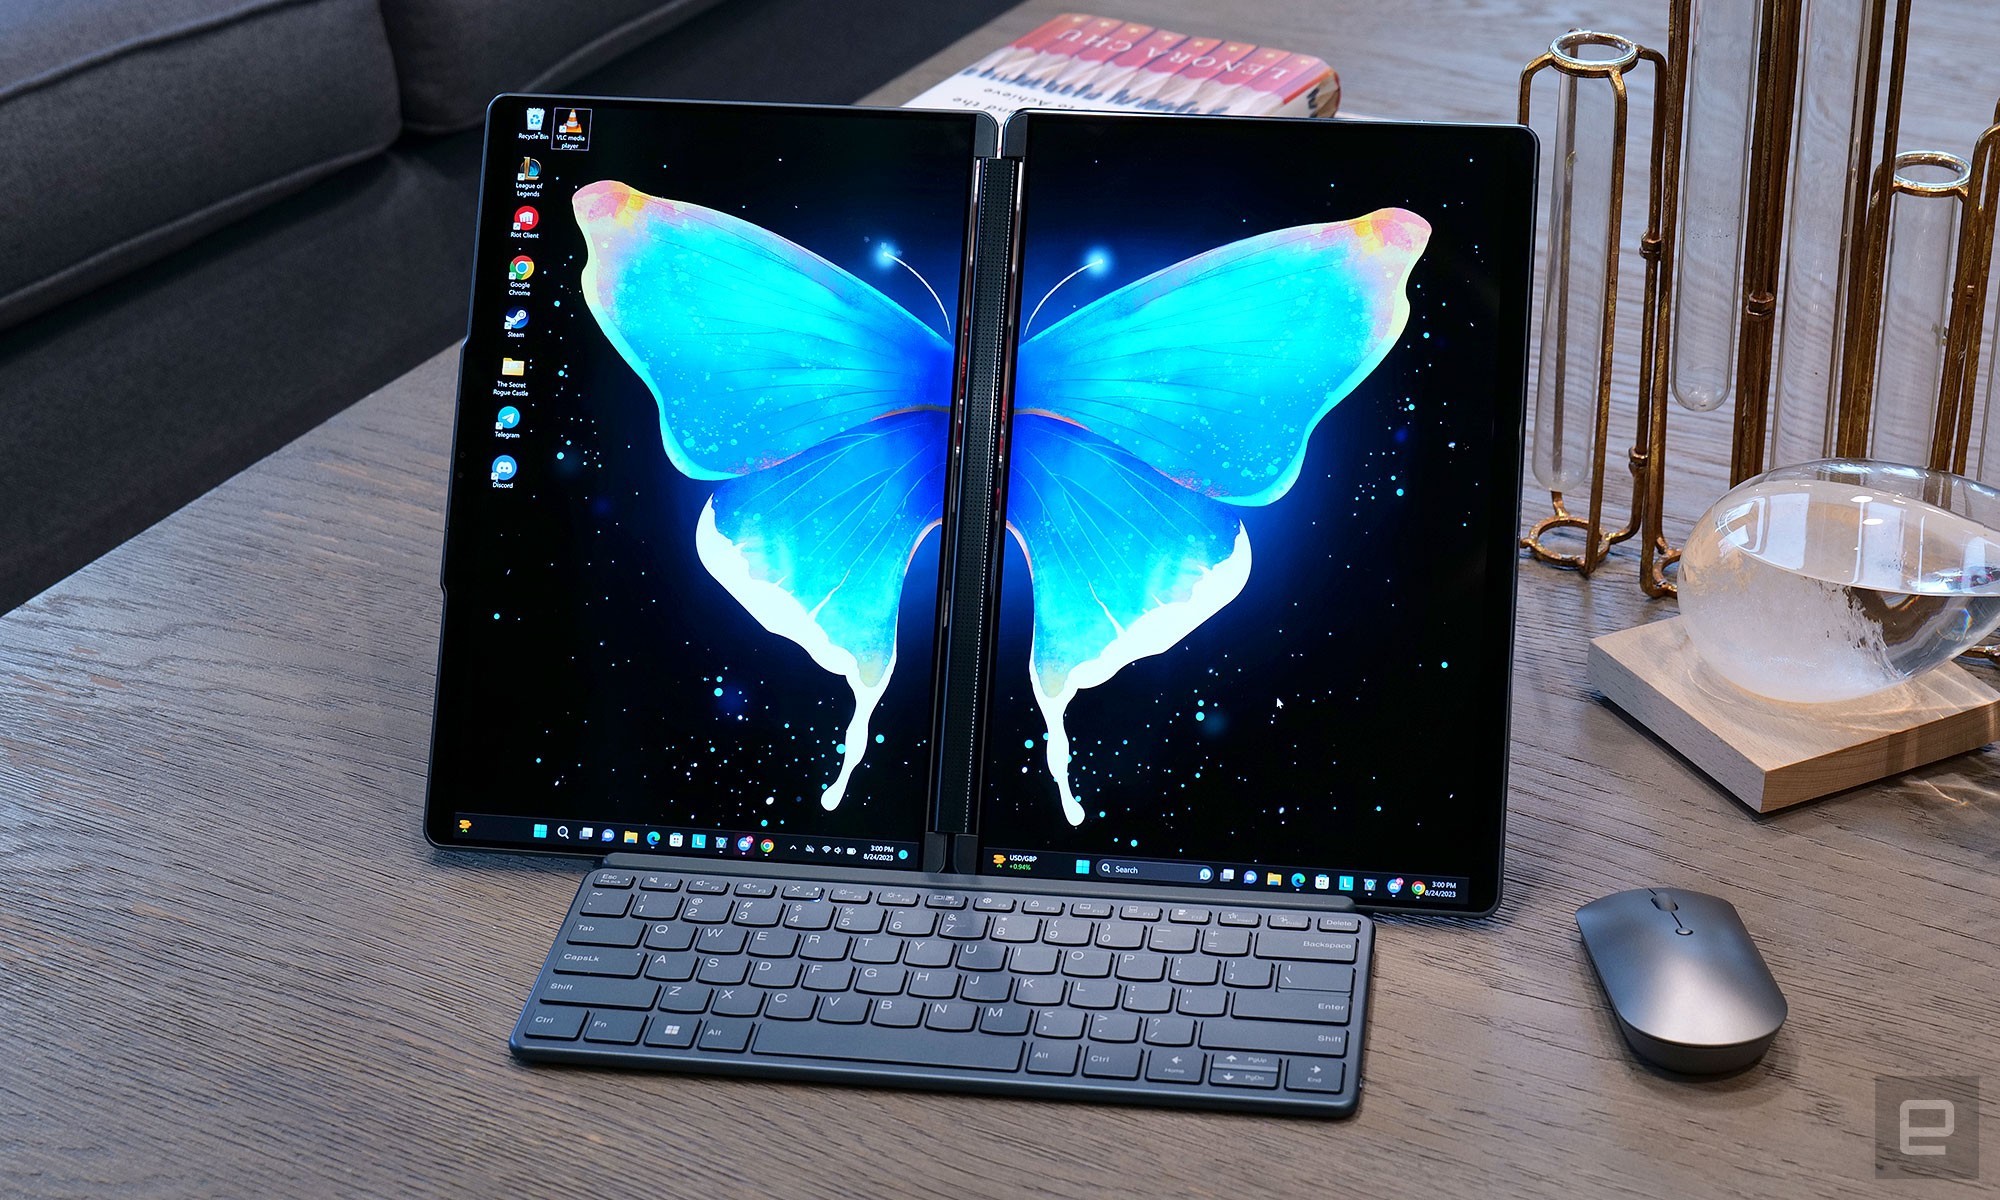 The Yoga Book 9i's side-by-side dual-screen mode is great for being able to reference sources while writing. | DeviceDaily.com